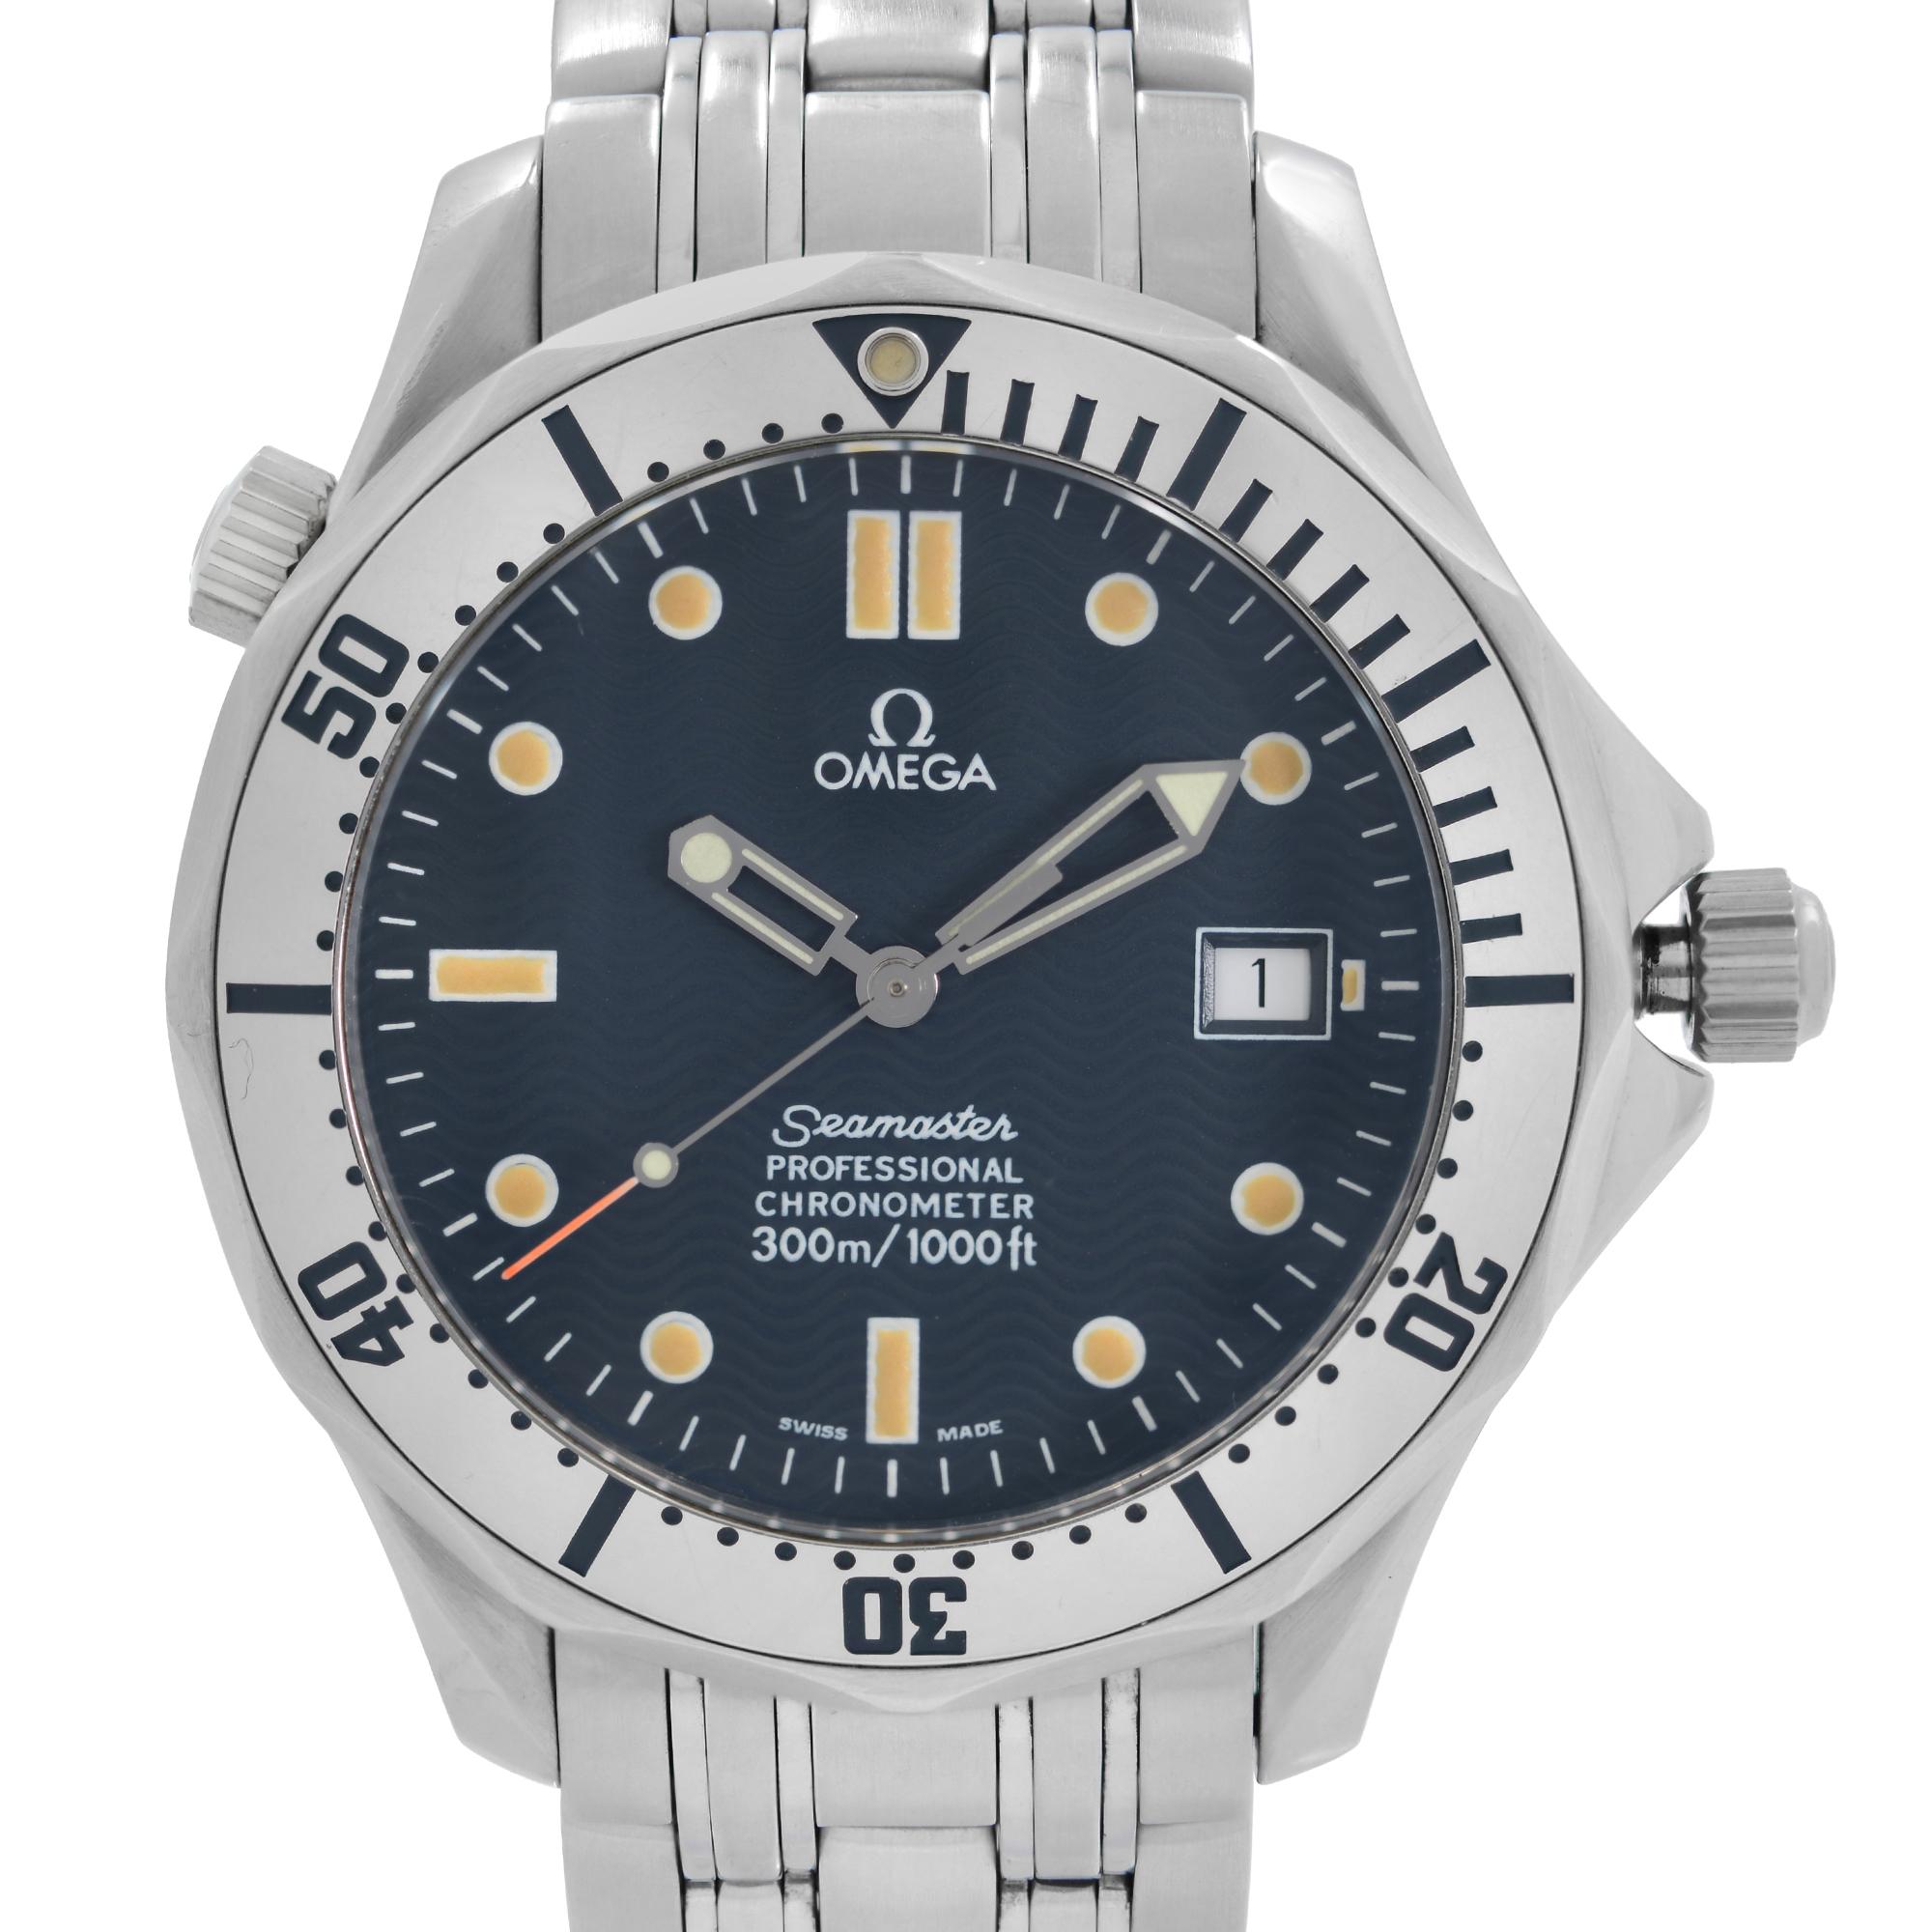 Pre-owned Vintage Omega Seamaster Professional Steel Blue Dial Automatic Mens Watch 2532.80.00. 1993 Collection. Seconds Hands Orange Tip Show Minor Fading. Powered by Mechanical (Automatic) Movement This Watch Features: Stainless Steel Case and